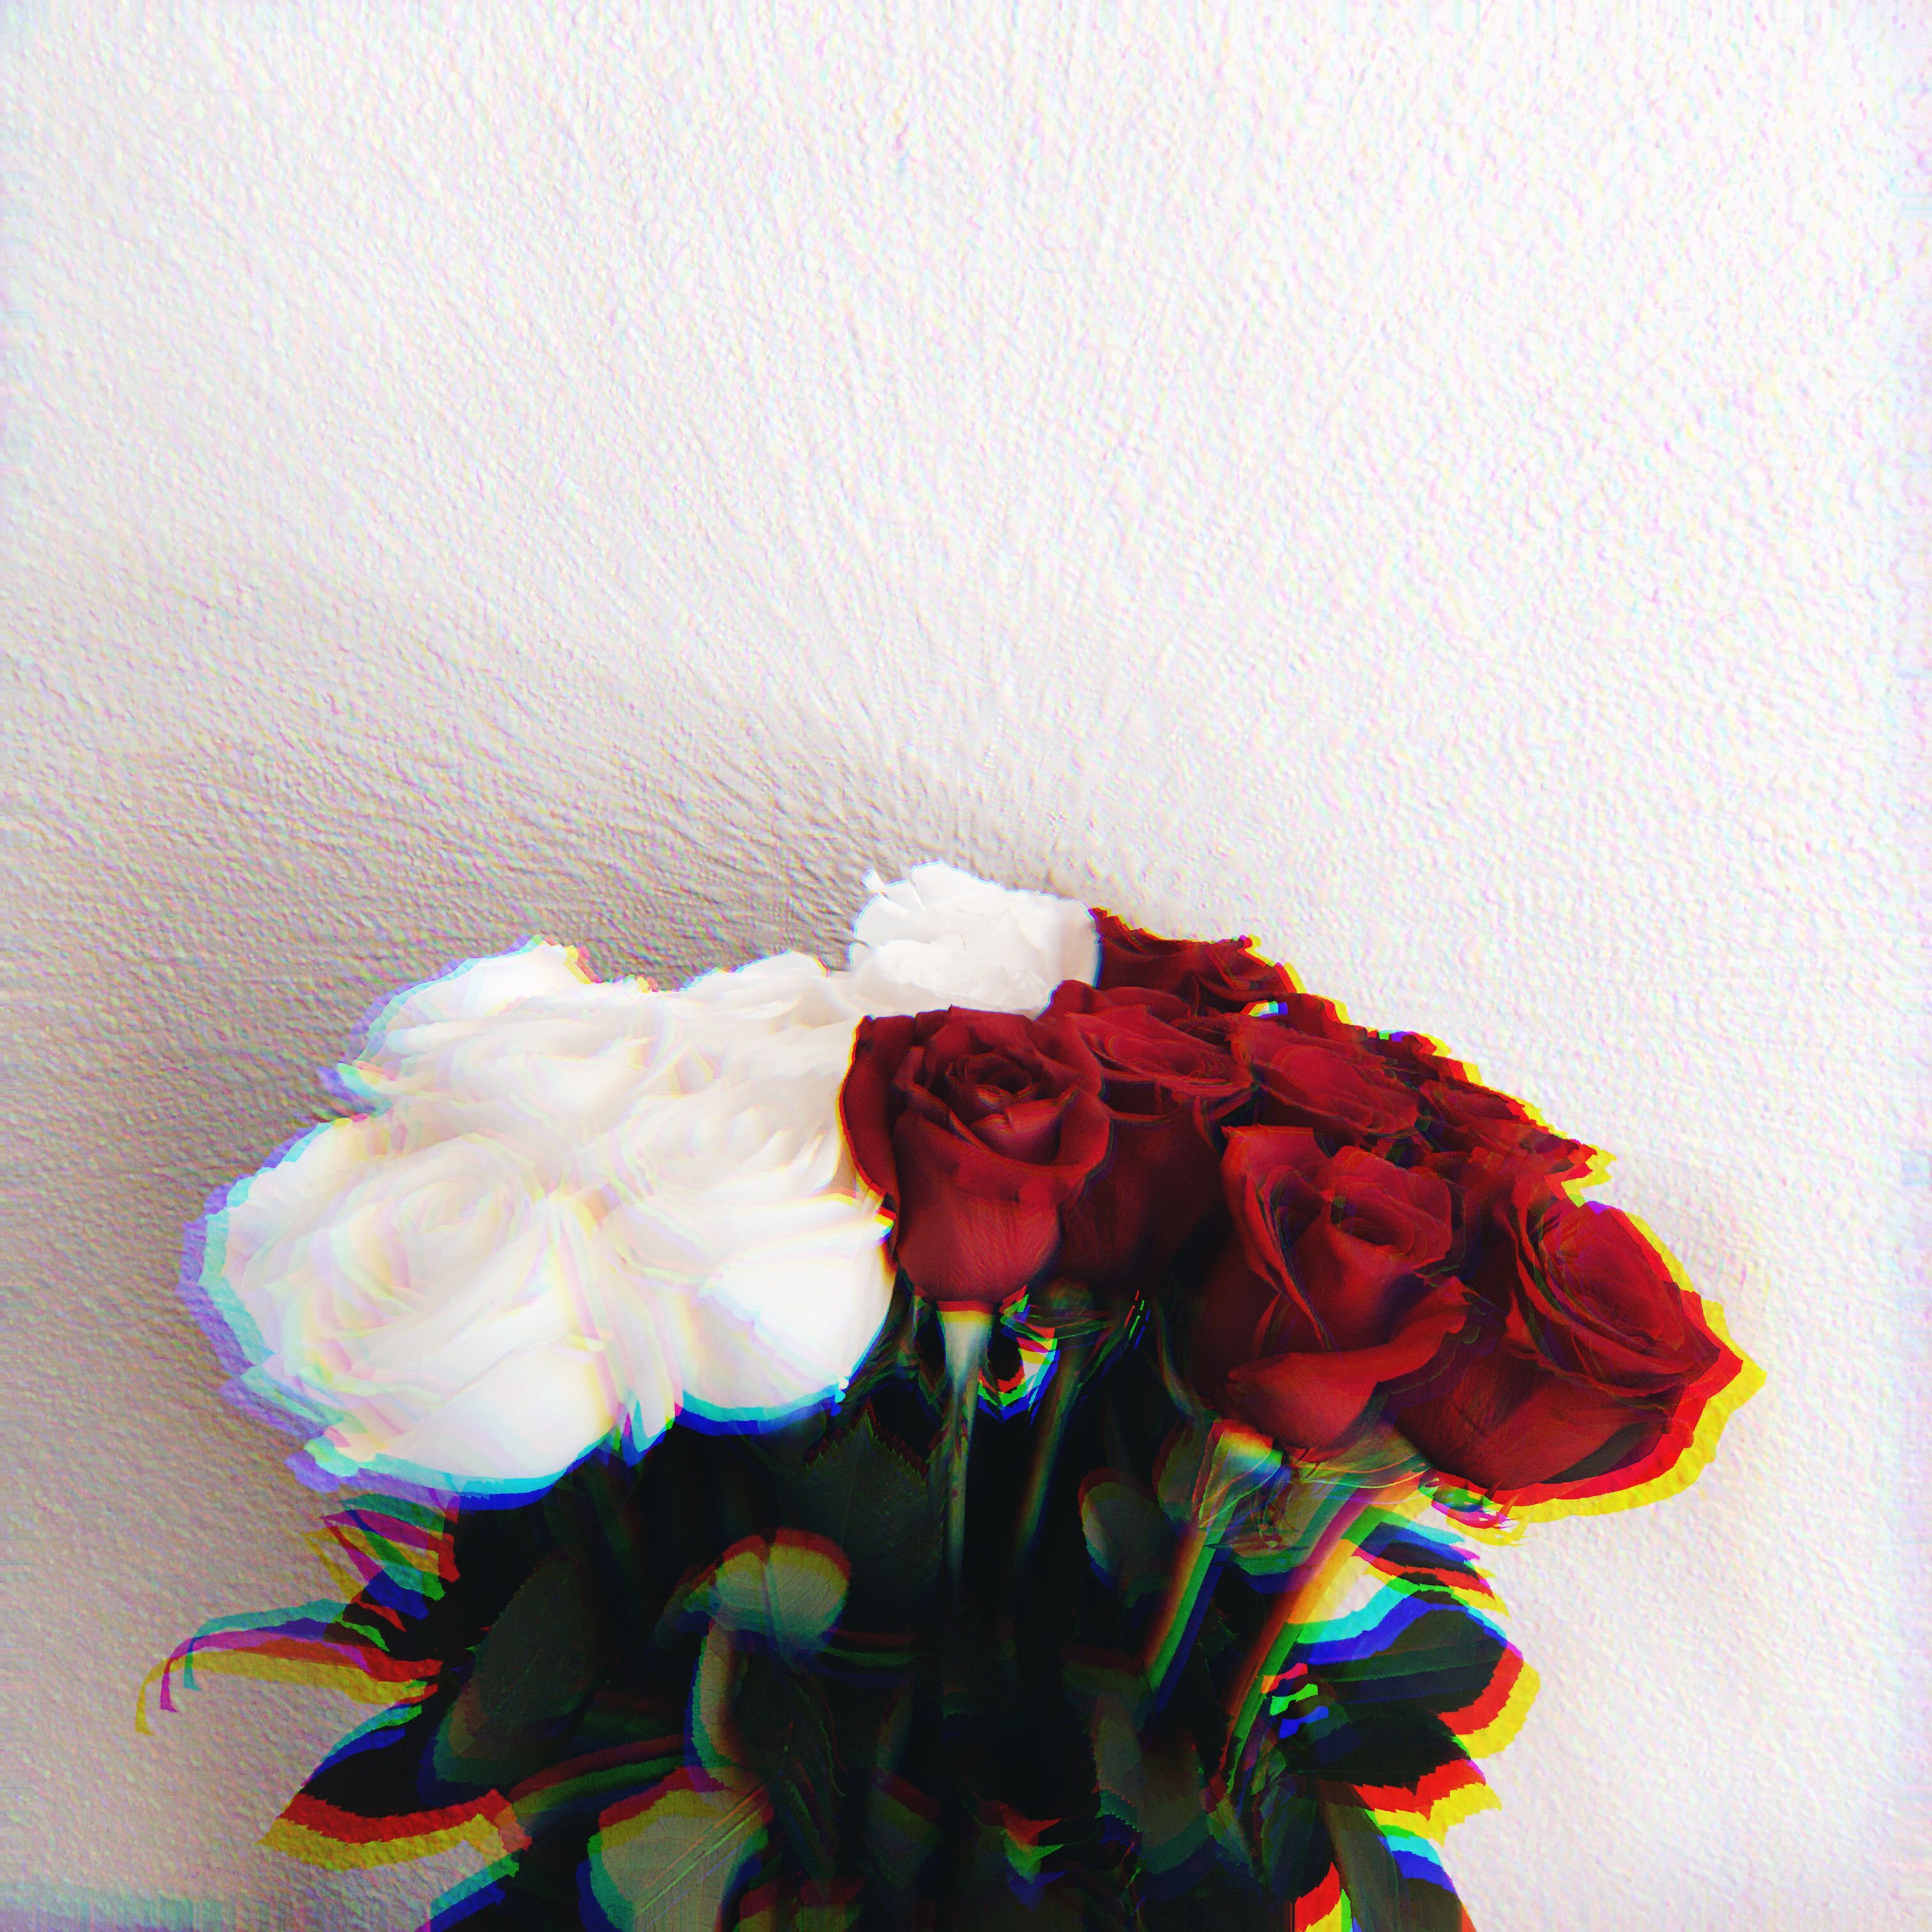 Aesthetic Wallpaper Black with Rose